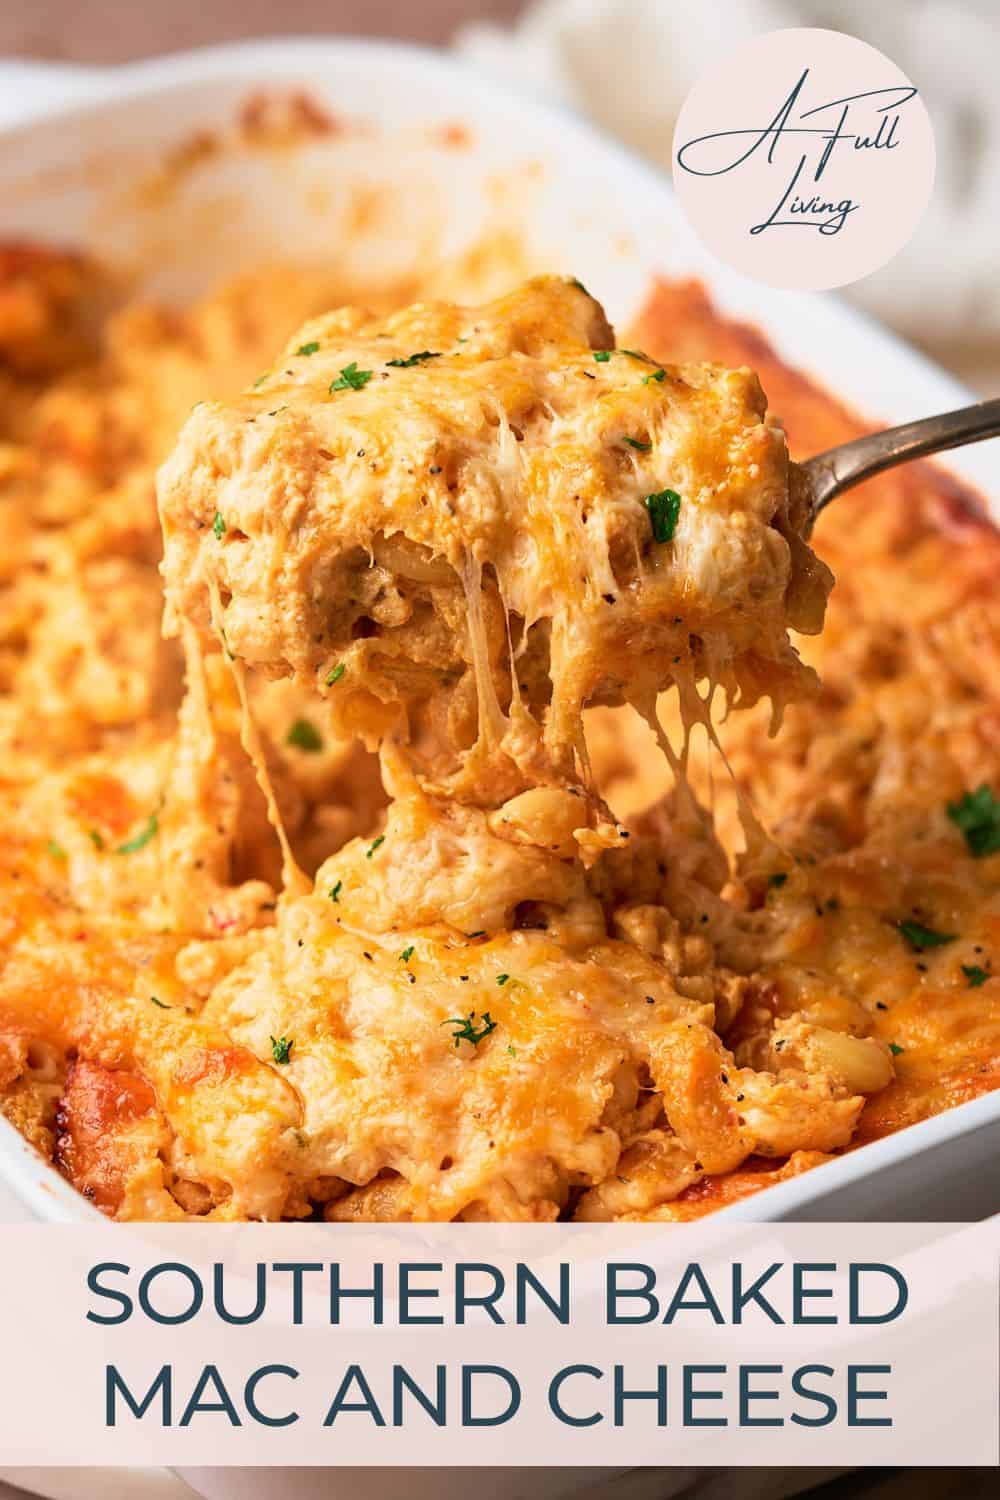 Southern Baked Mac and Cheese recipe.